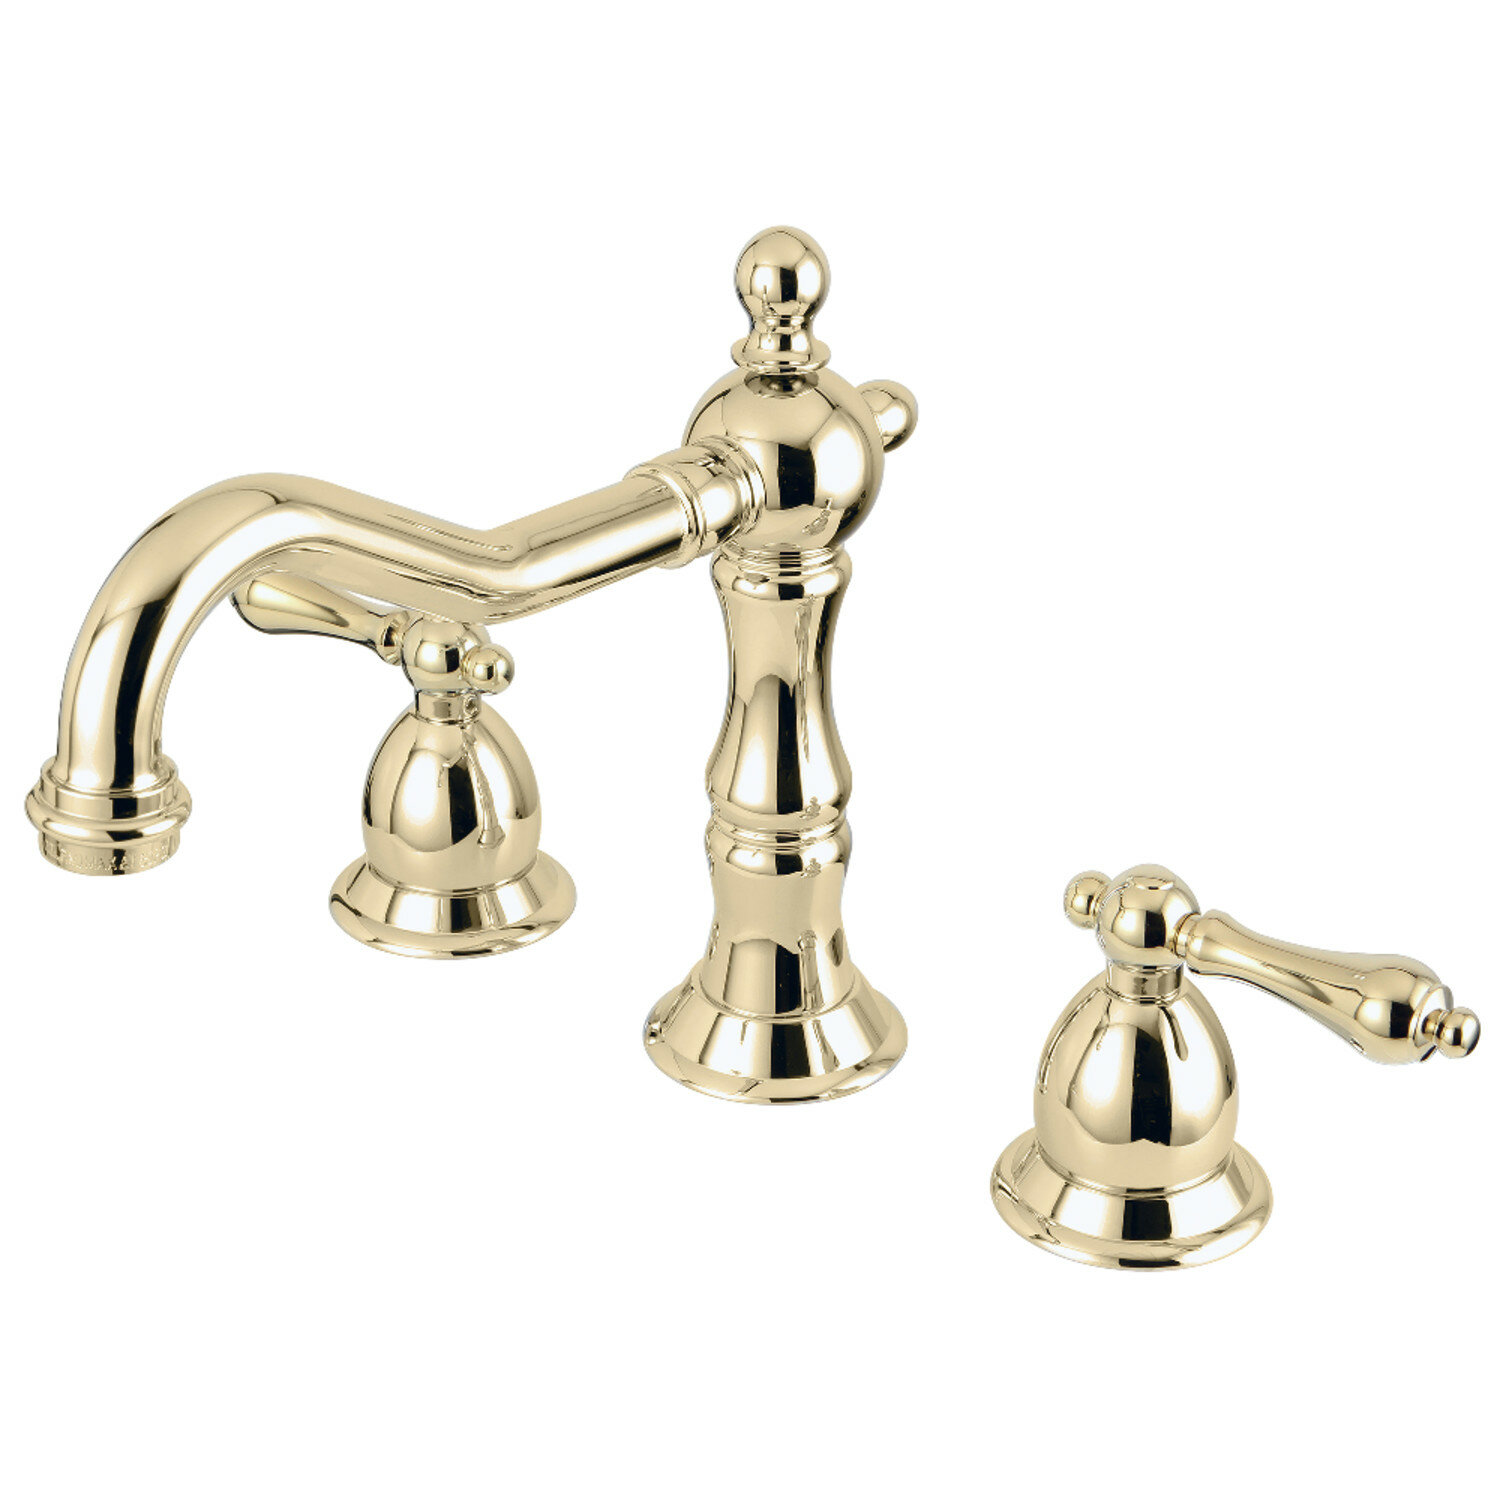 Kingston Brass Vintage Lavatory Widespread Bathroom Faucet With